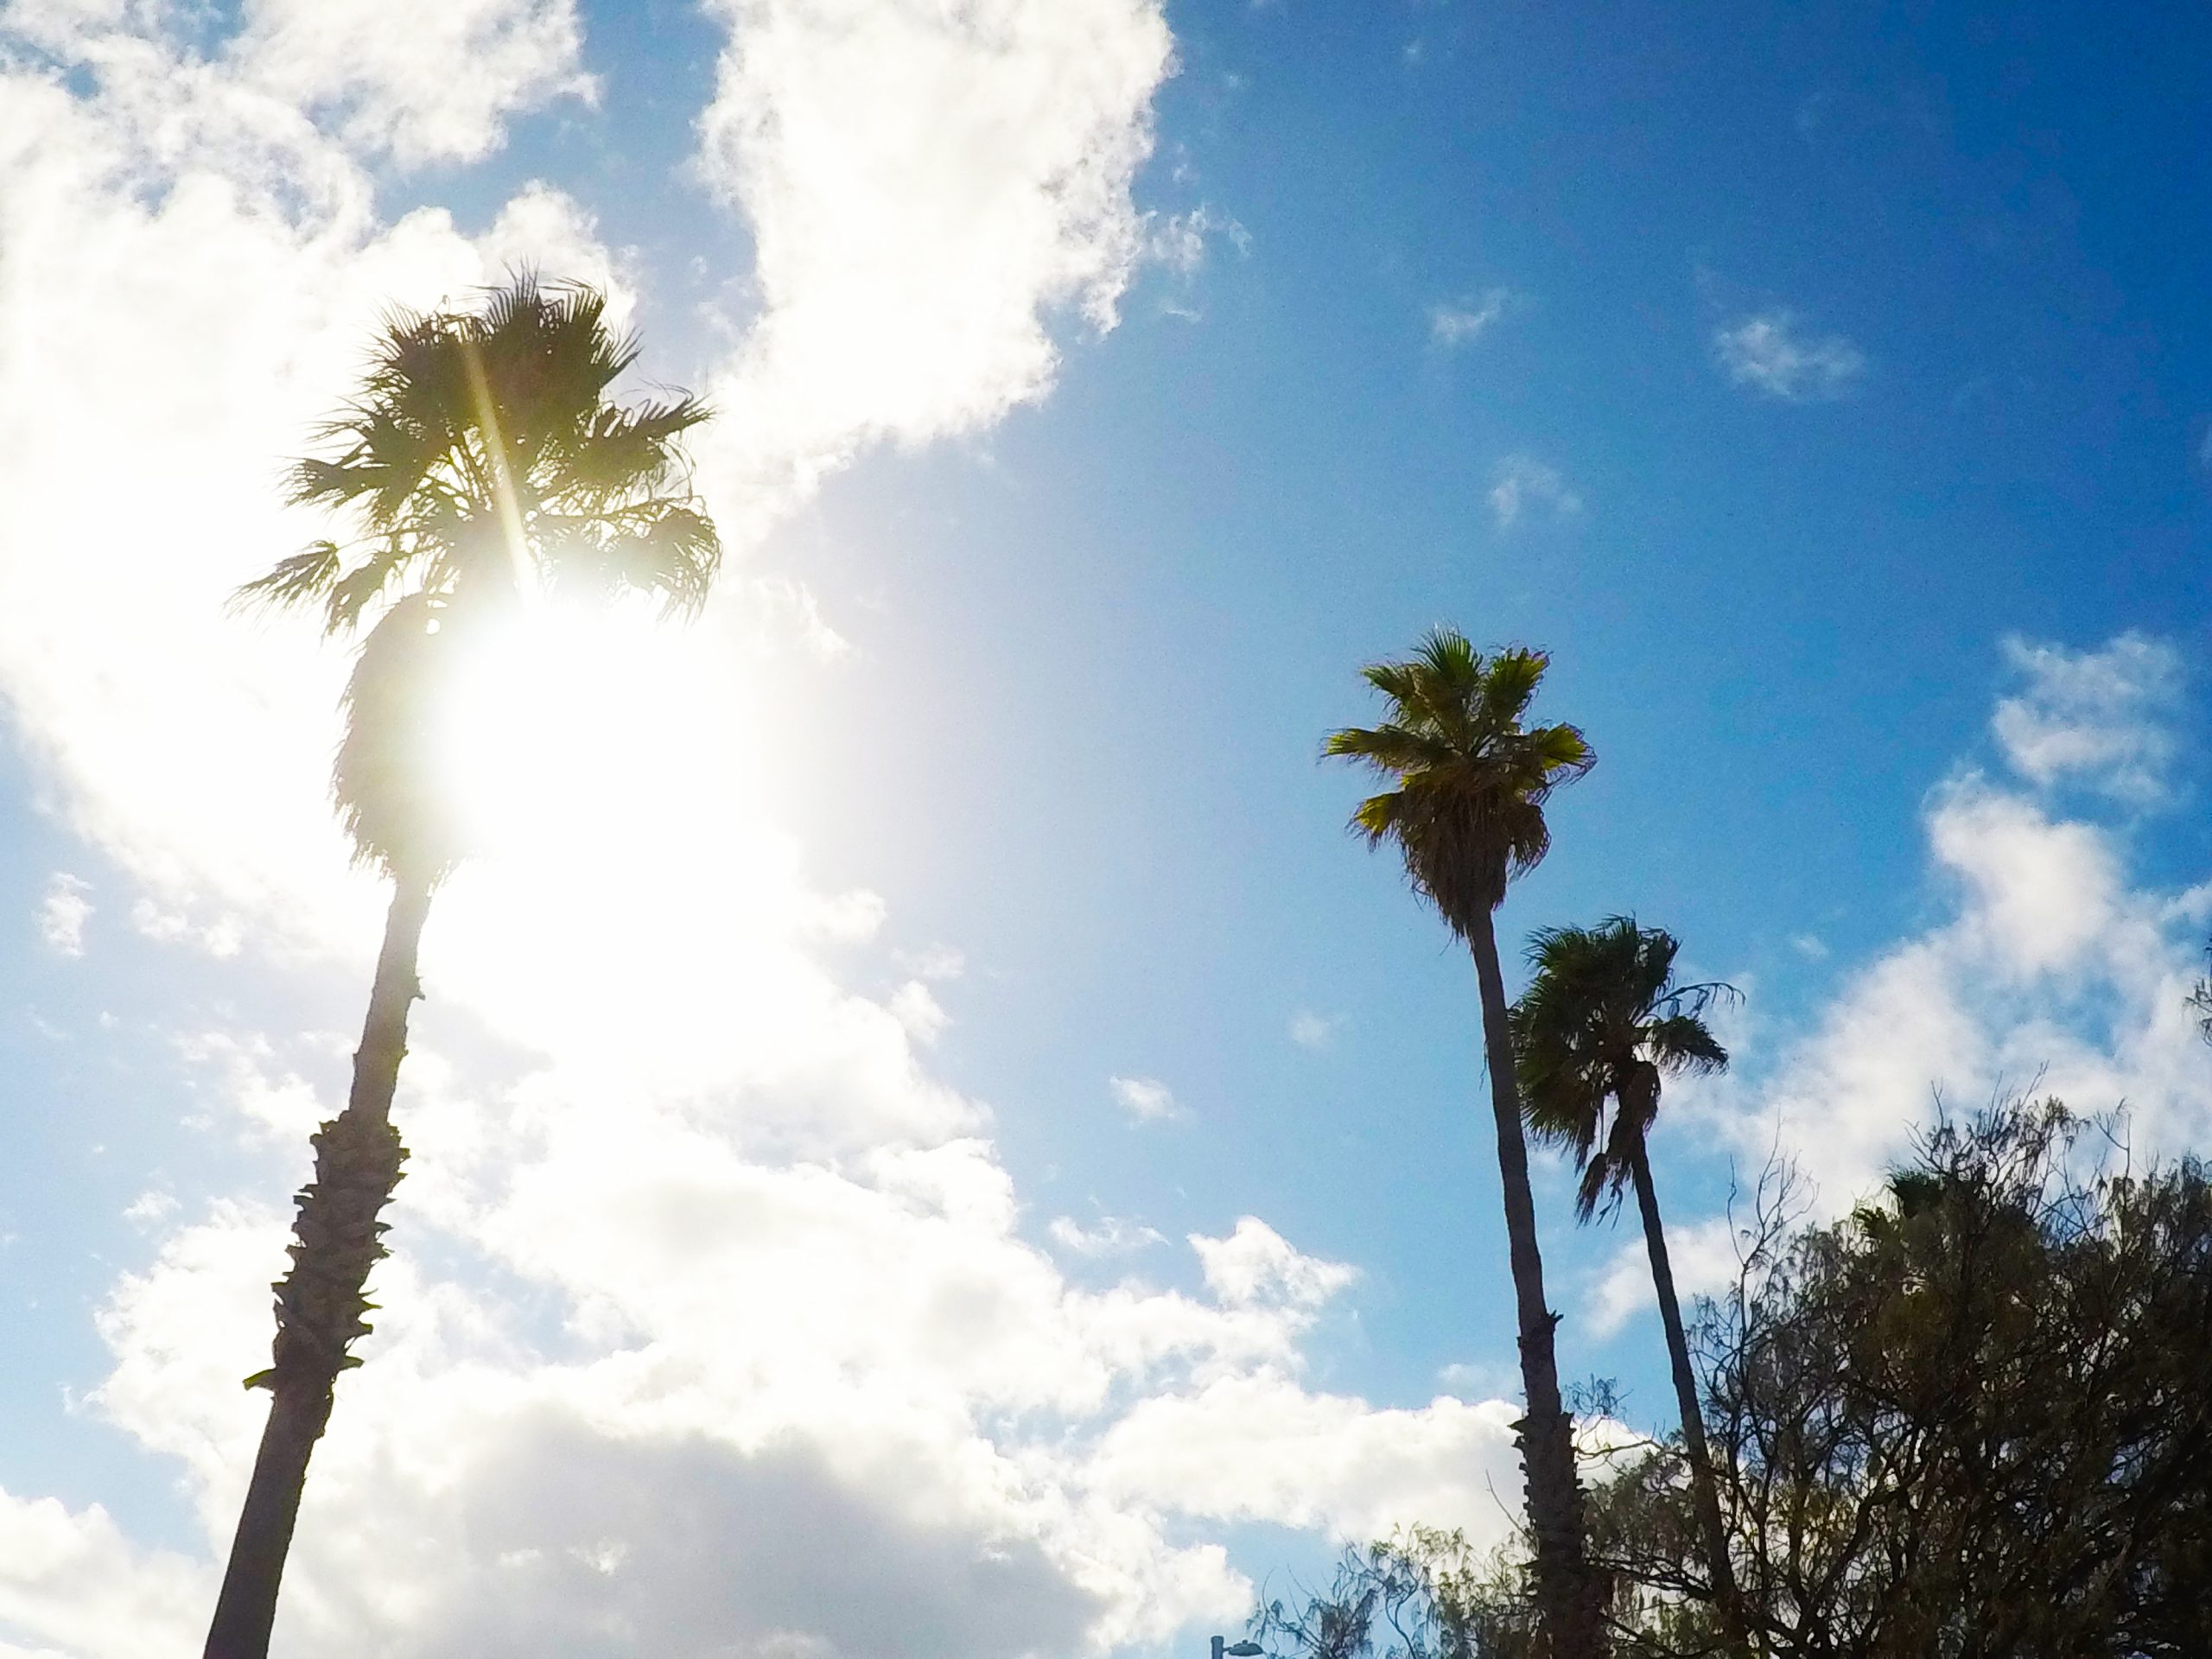 Palm trees, sun, and blue skies